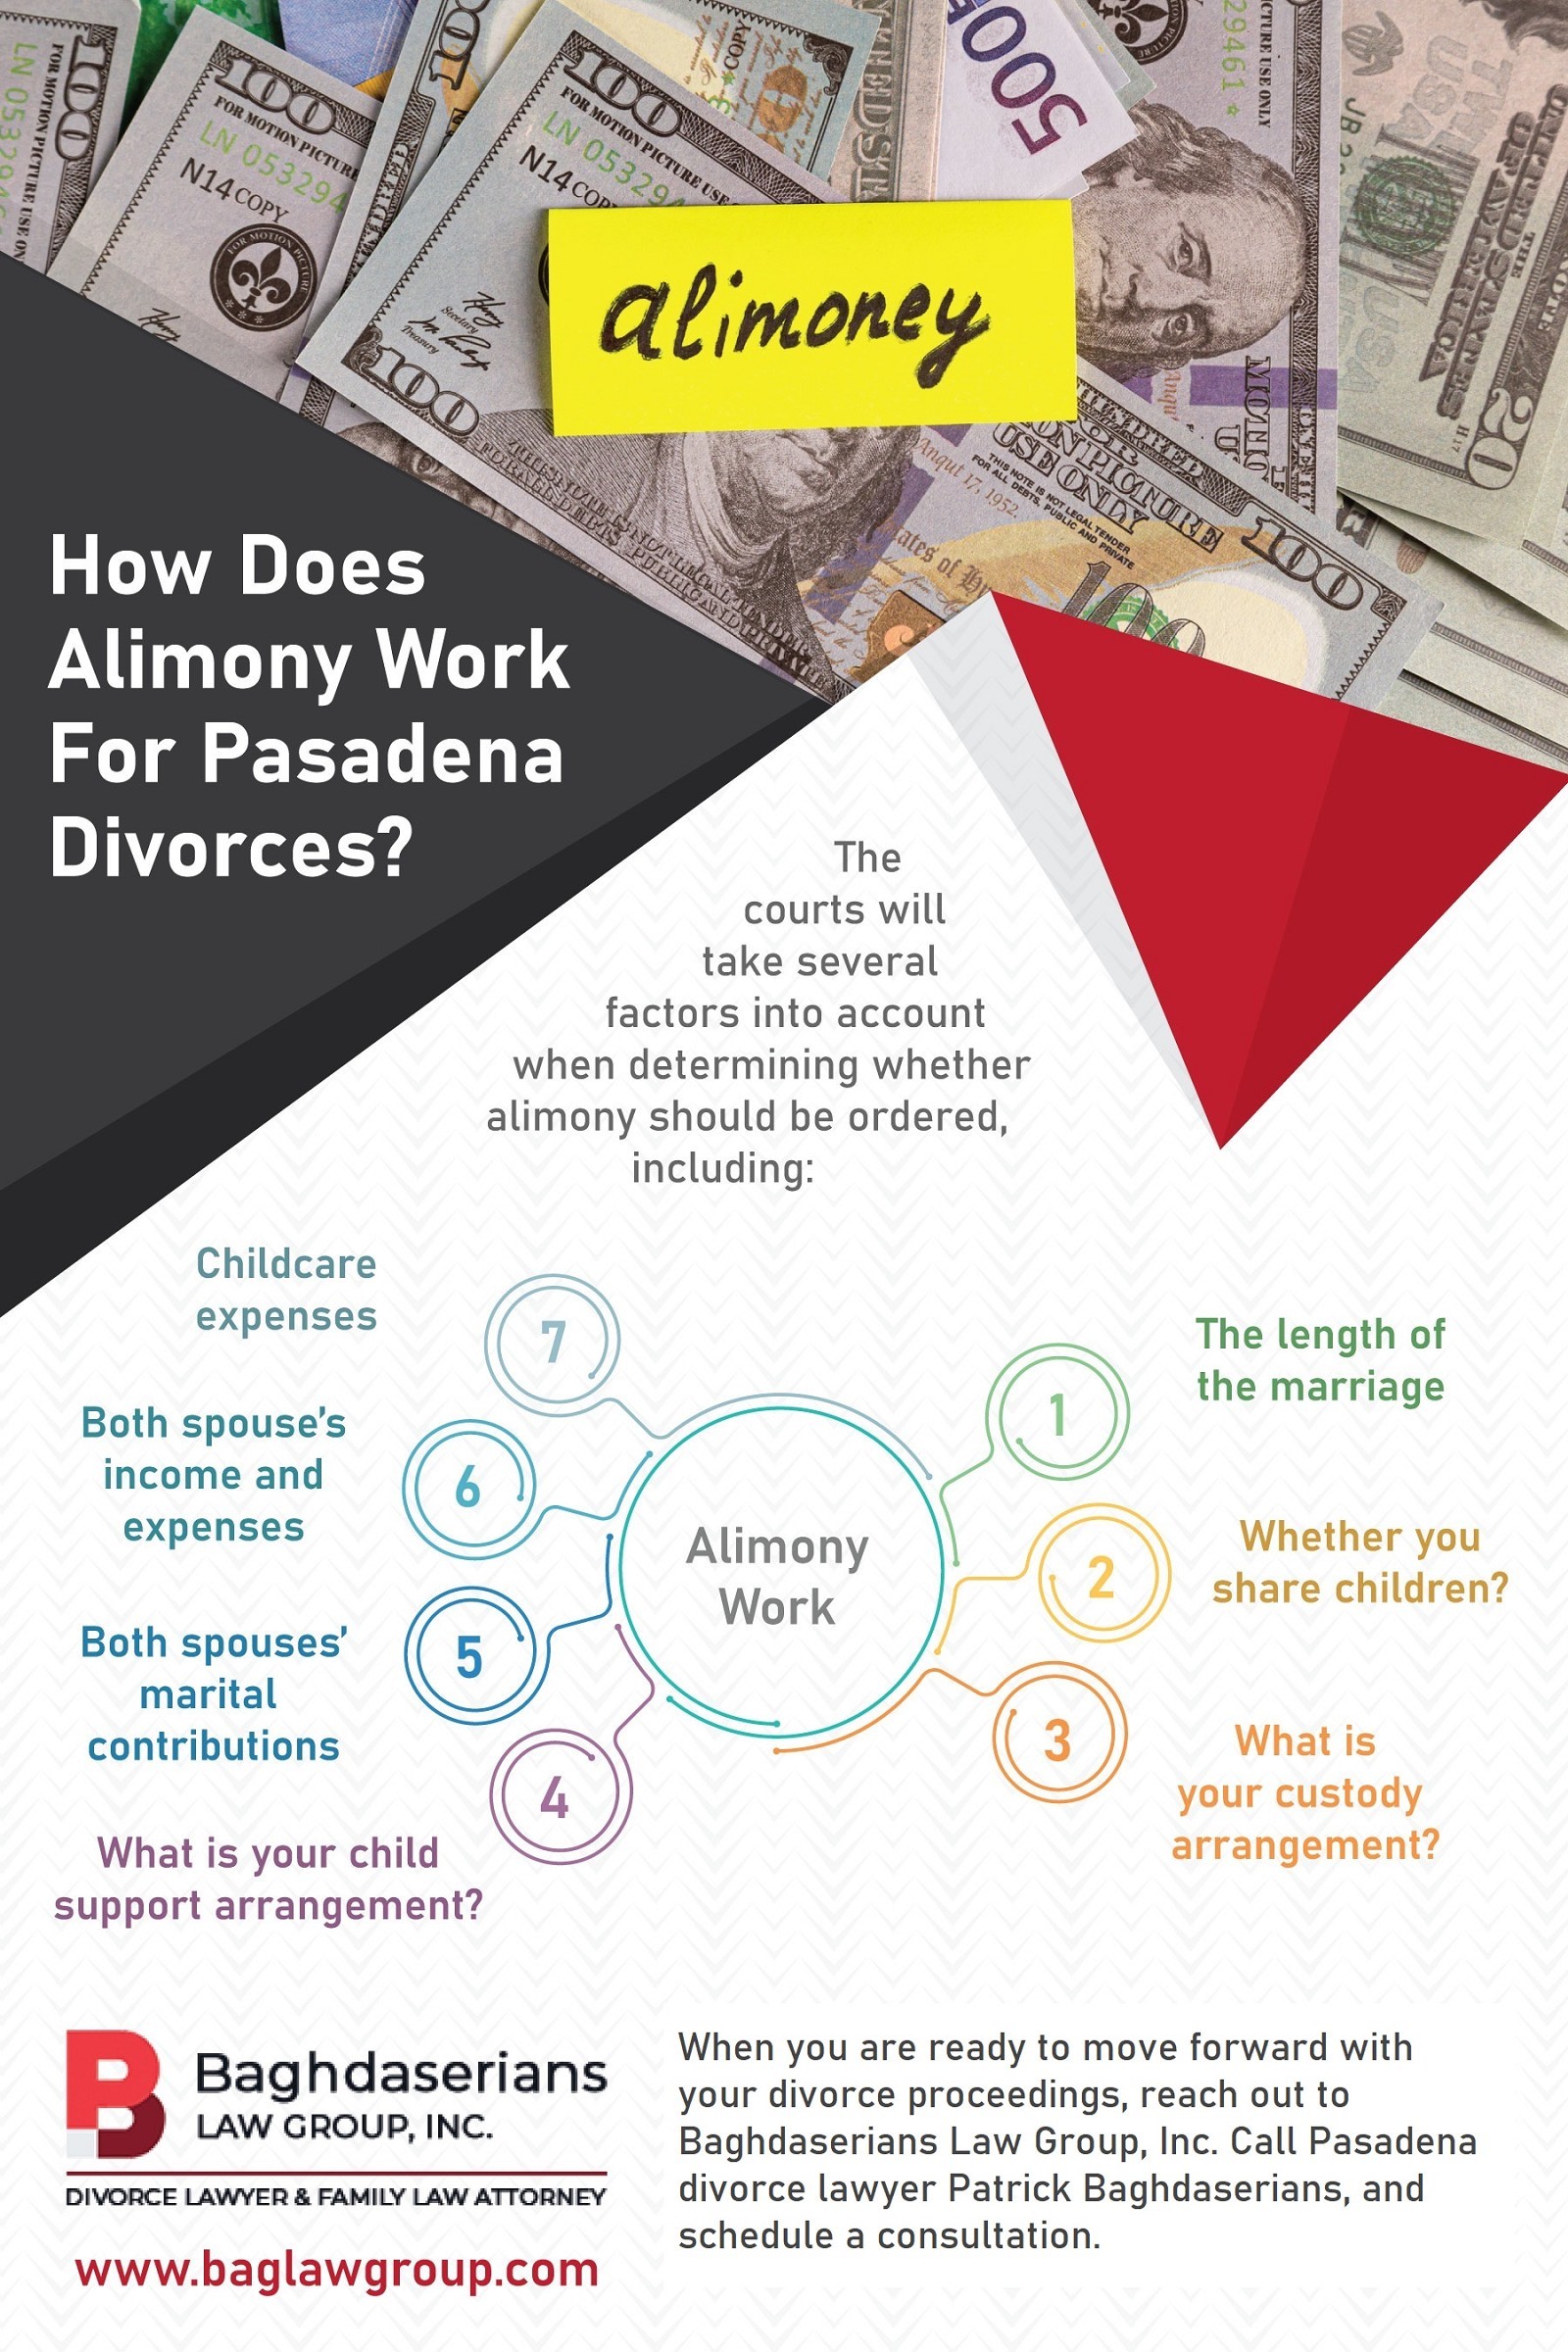 How Does Alimony Work For Pasadena Divorces?